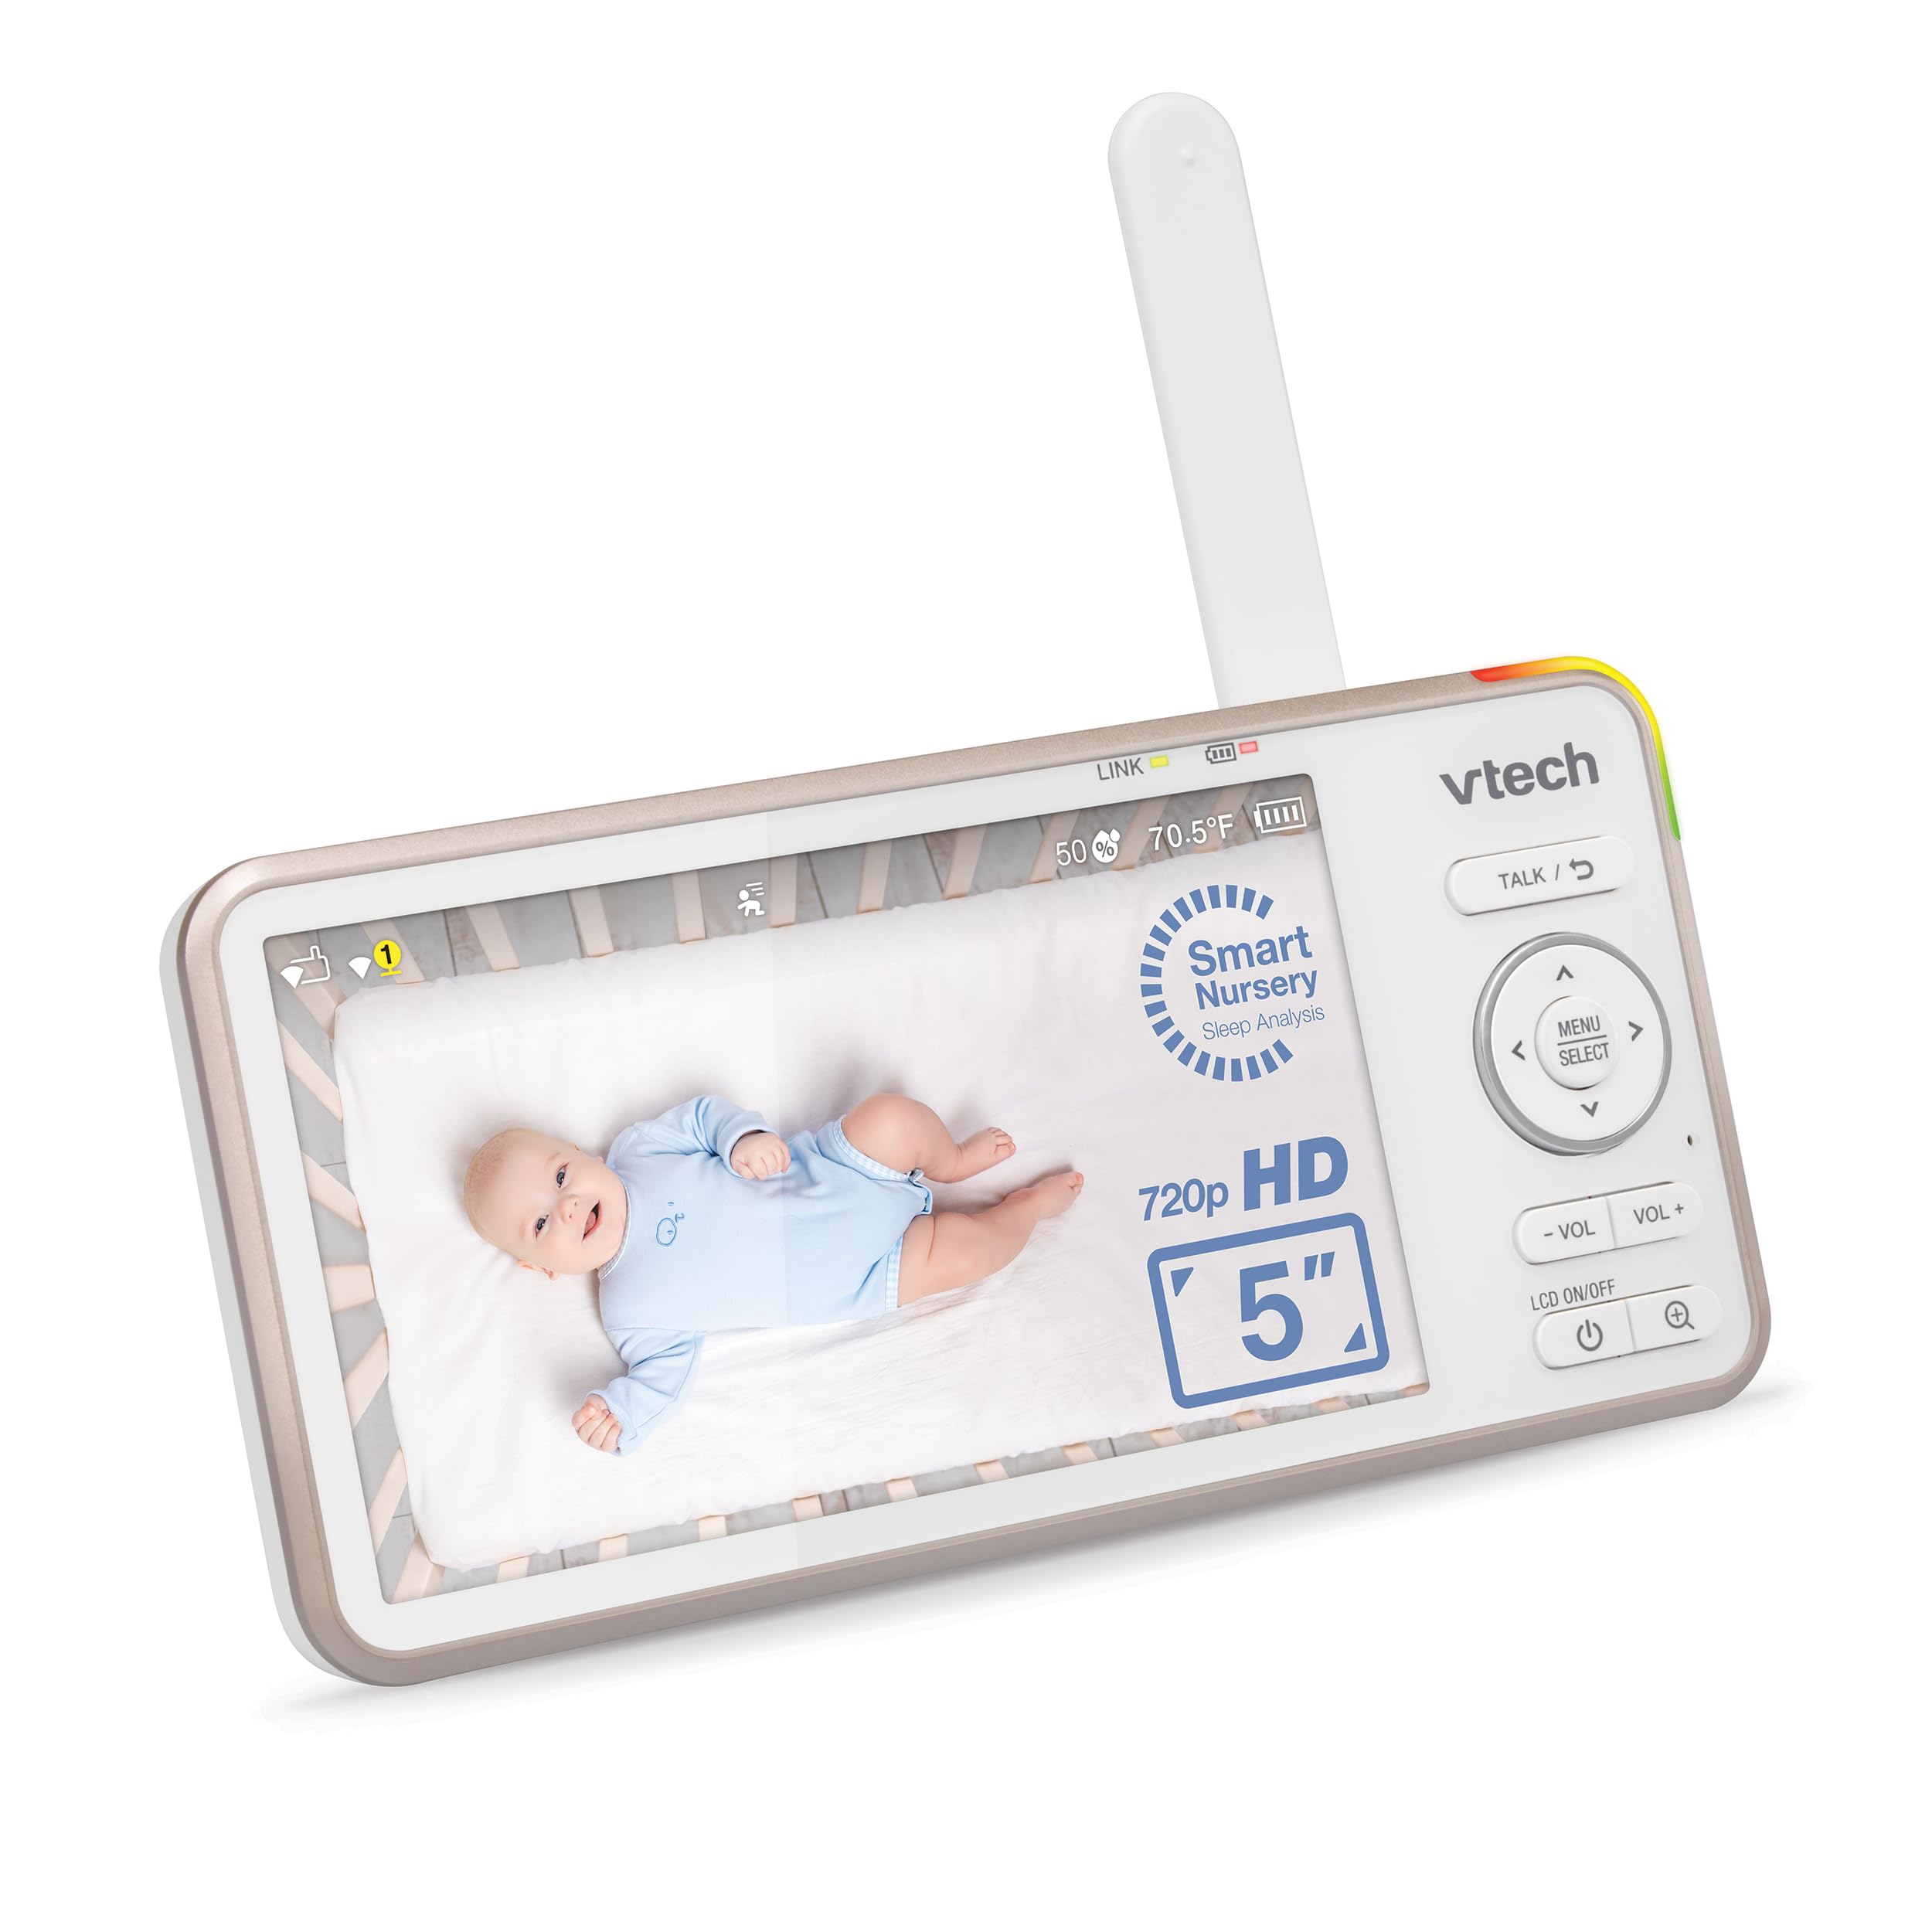 VTech VC2105 V-Care 1080p FHD Over-the-Crib Wifi Smart Baby Monitor with 5